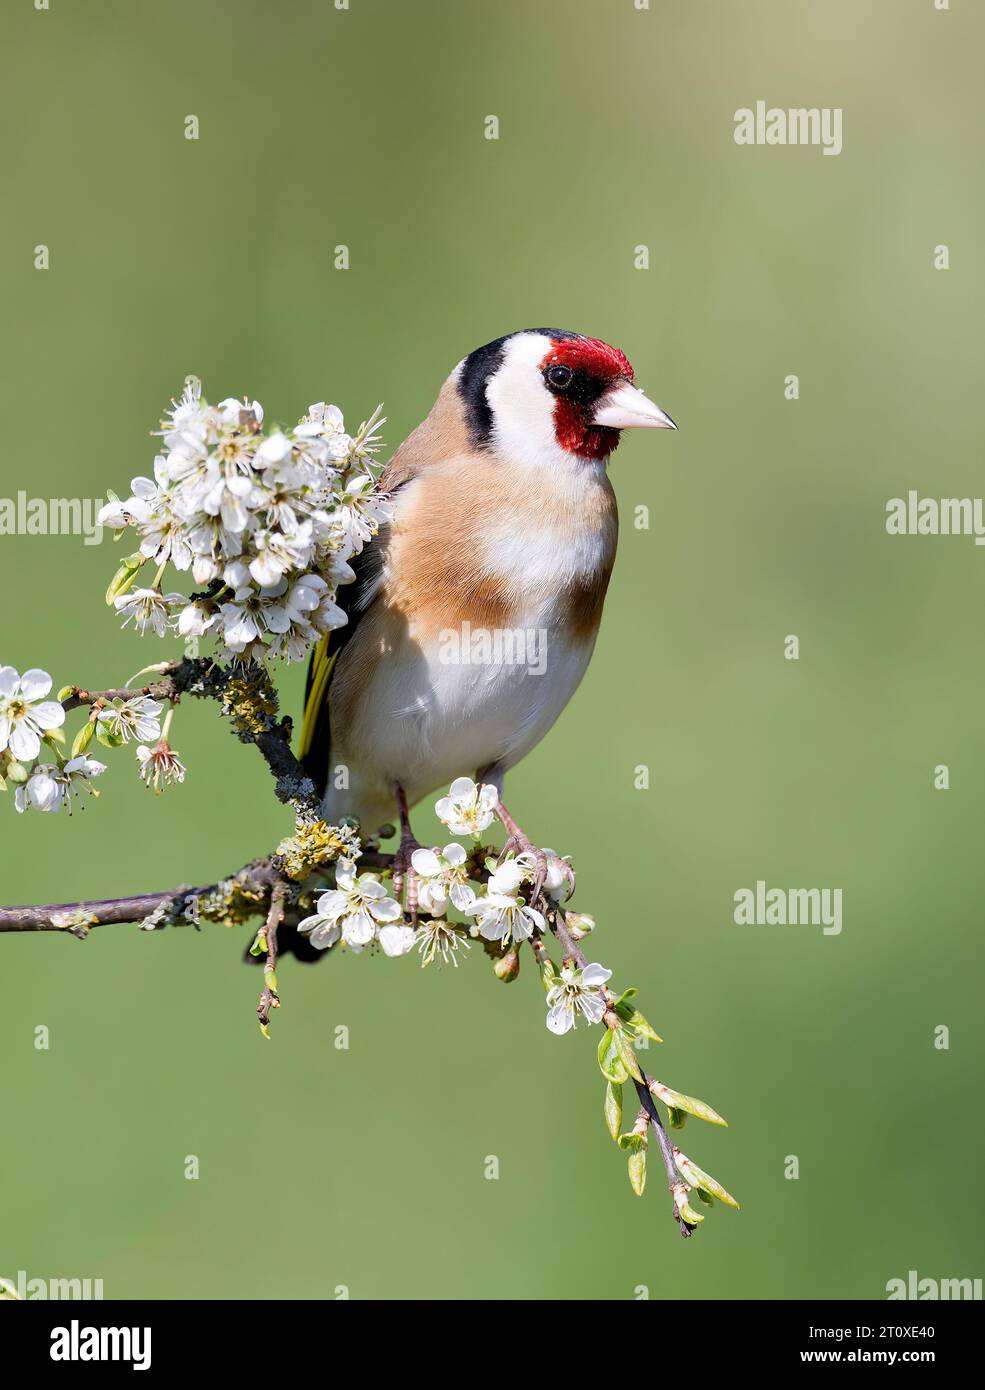 Goldfinch Carduelis Carduelis, perched in a garden Stock Photo